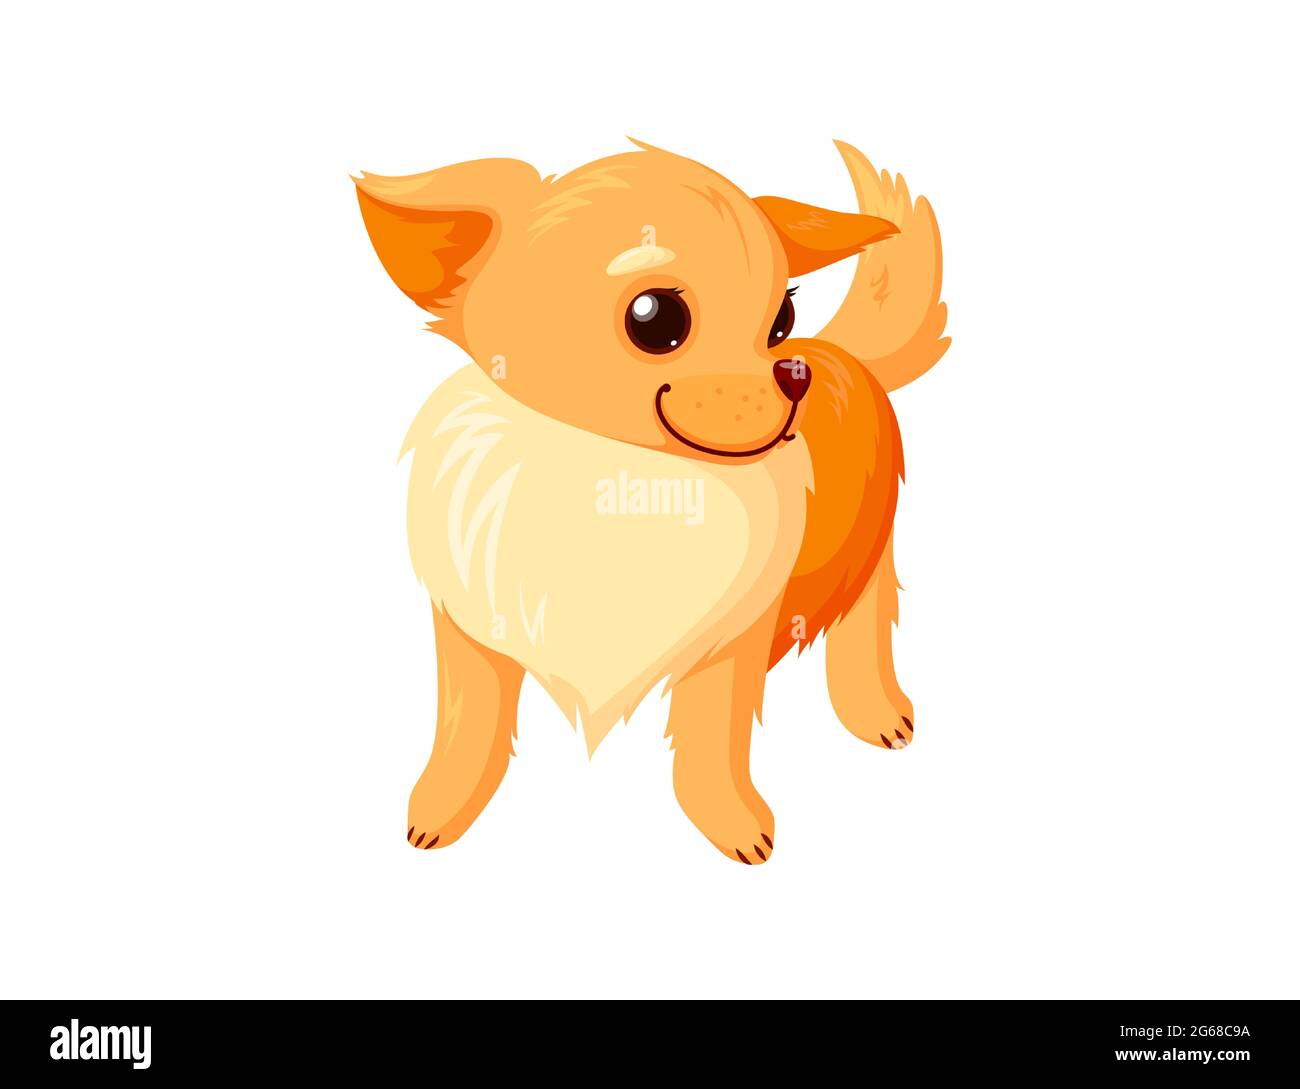 Cartoon funny dog standing on white background Vector Image